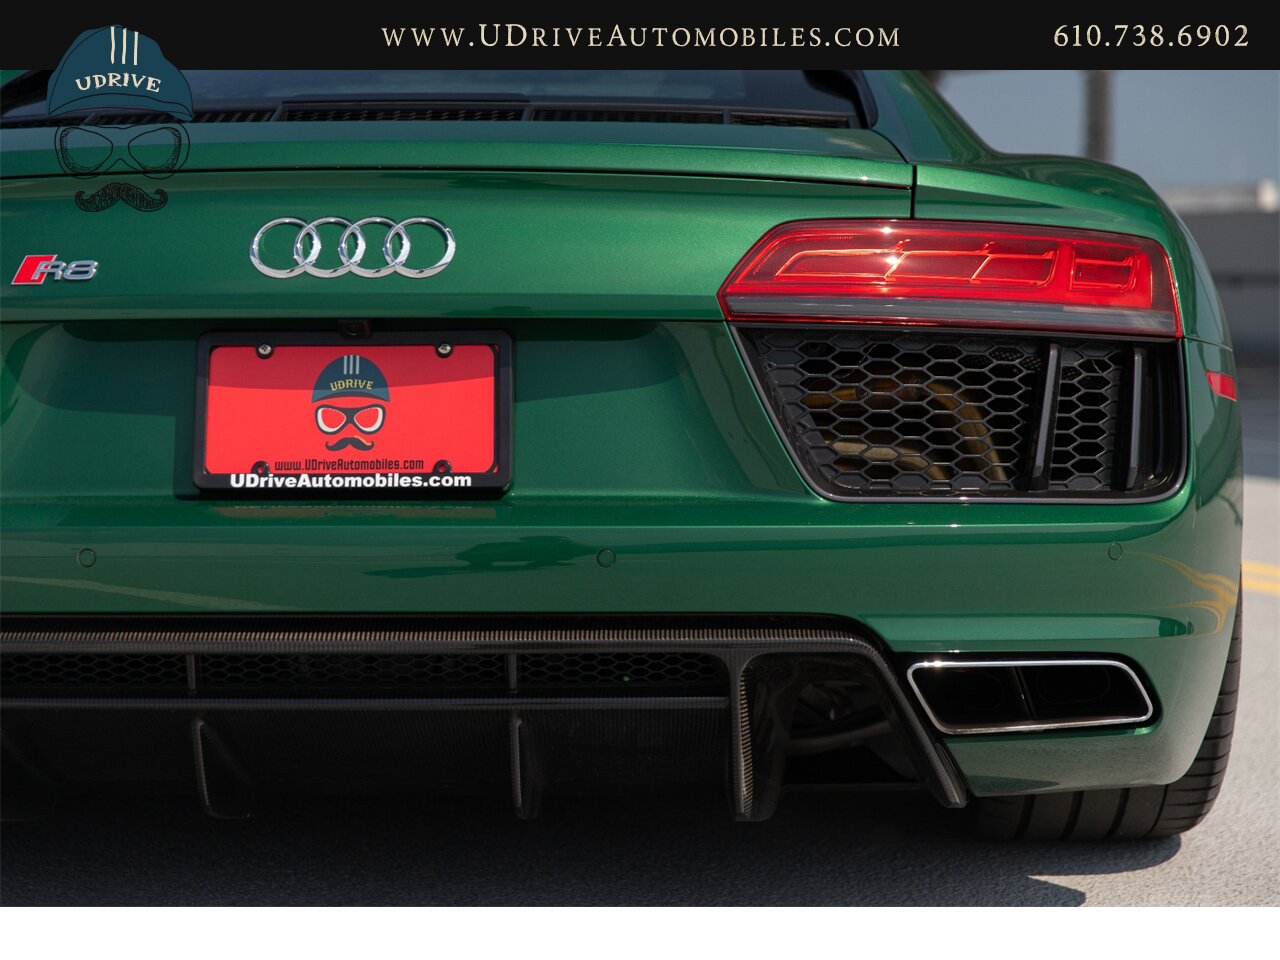 2017 Audi R8 Audi Exclusive Avocado Green Vermont Brown Leather  Diamond Stitching V10 Carbon Fiber - Photo 23 - West Chester, PA 19382